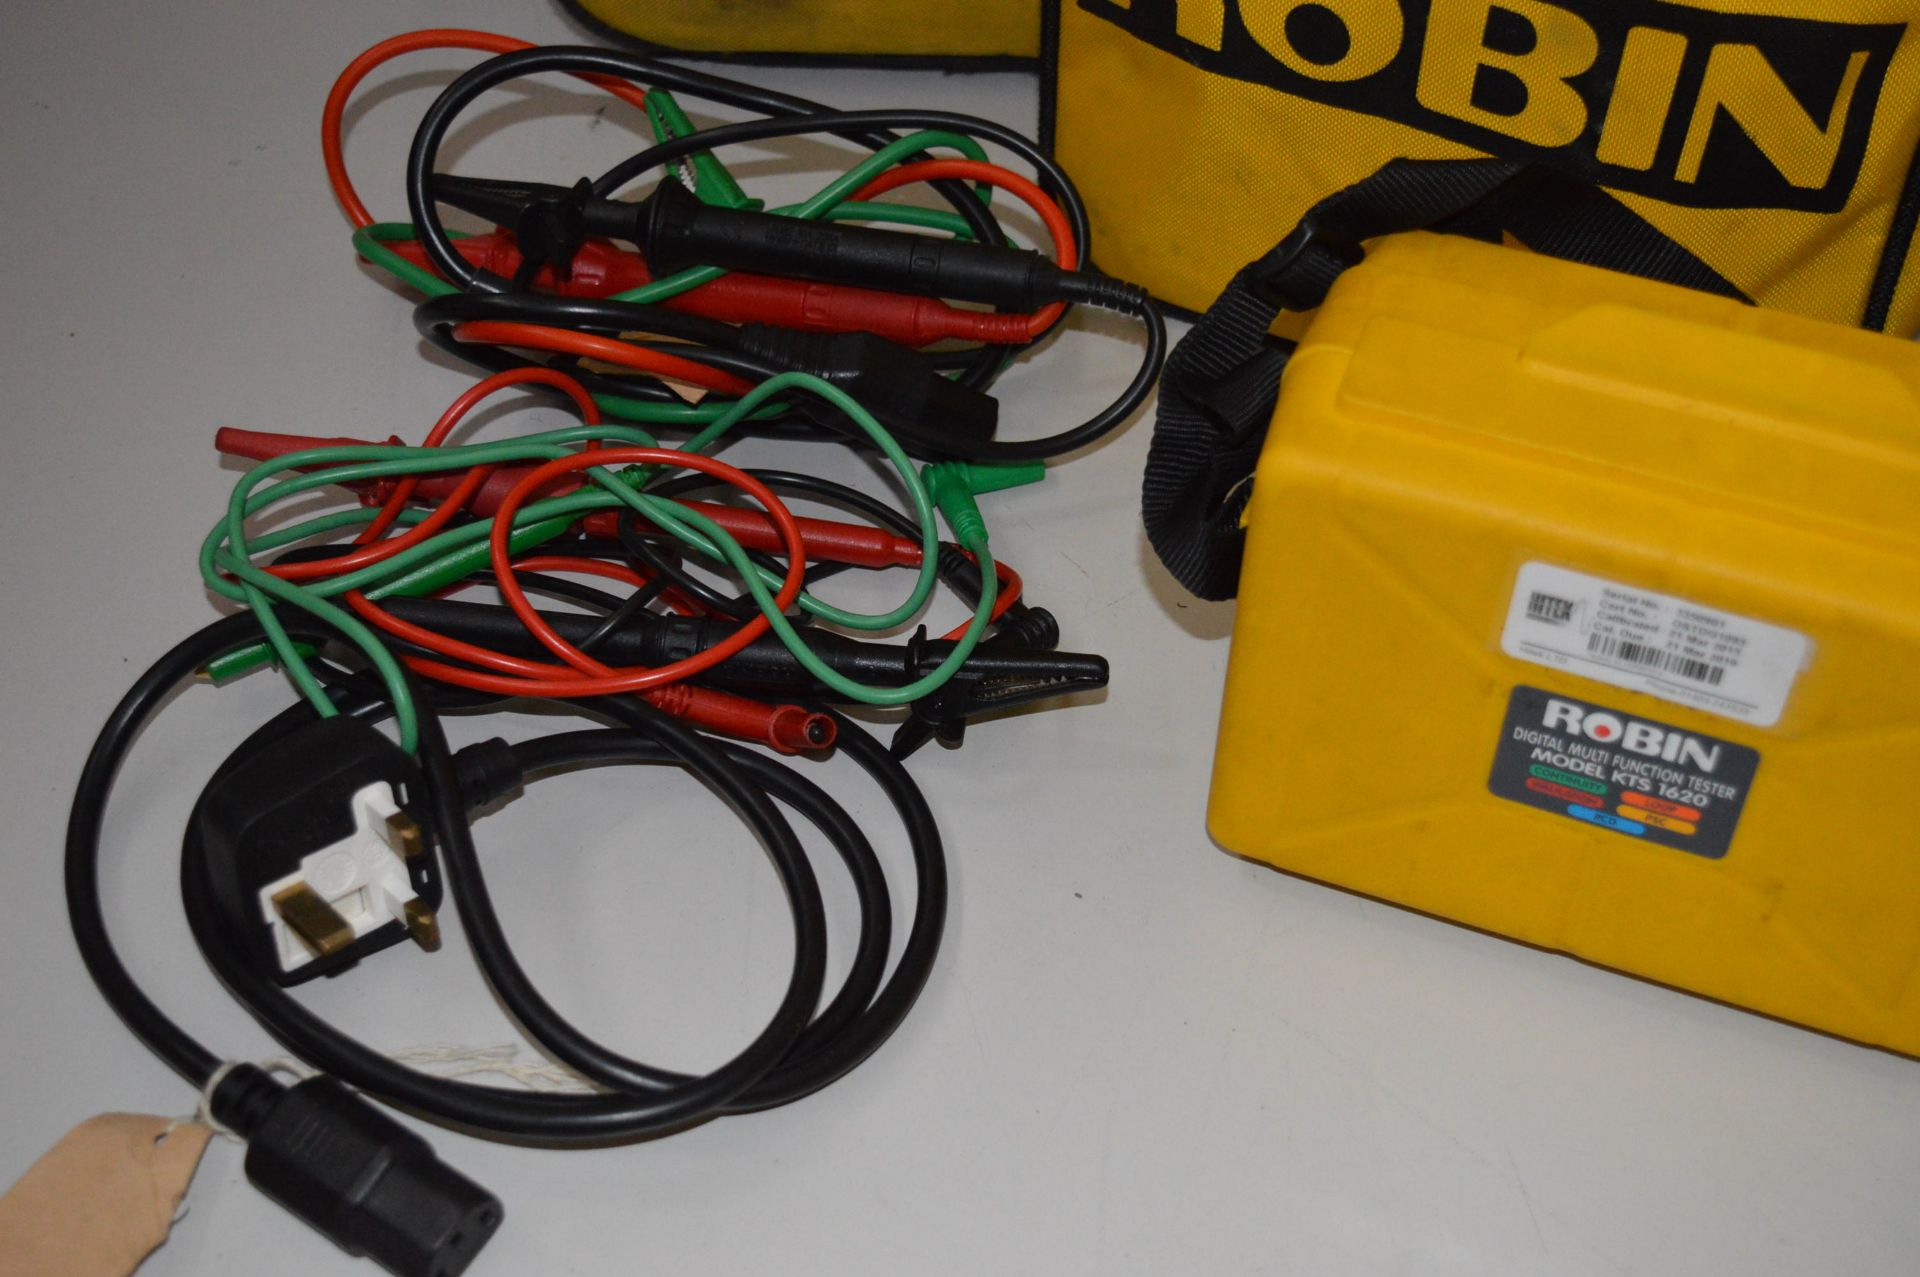 1 x Robin 5 in 1 Multi Function Tester - Model KTS 1620 - Includes Case and Cables - For The Testing - Image 3 of 8